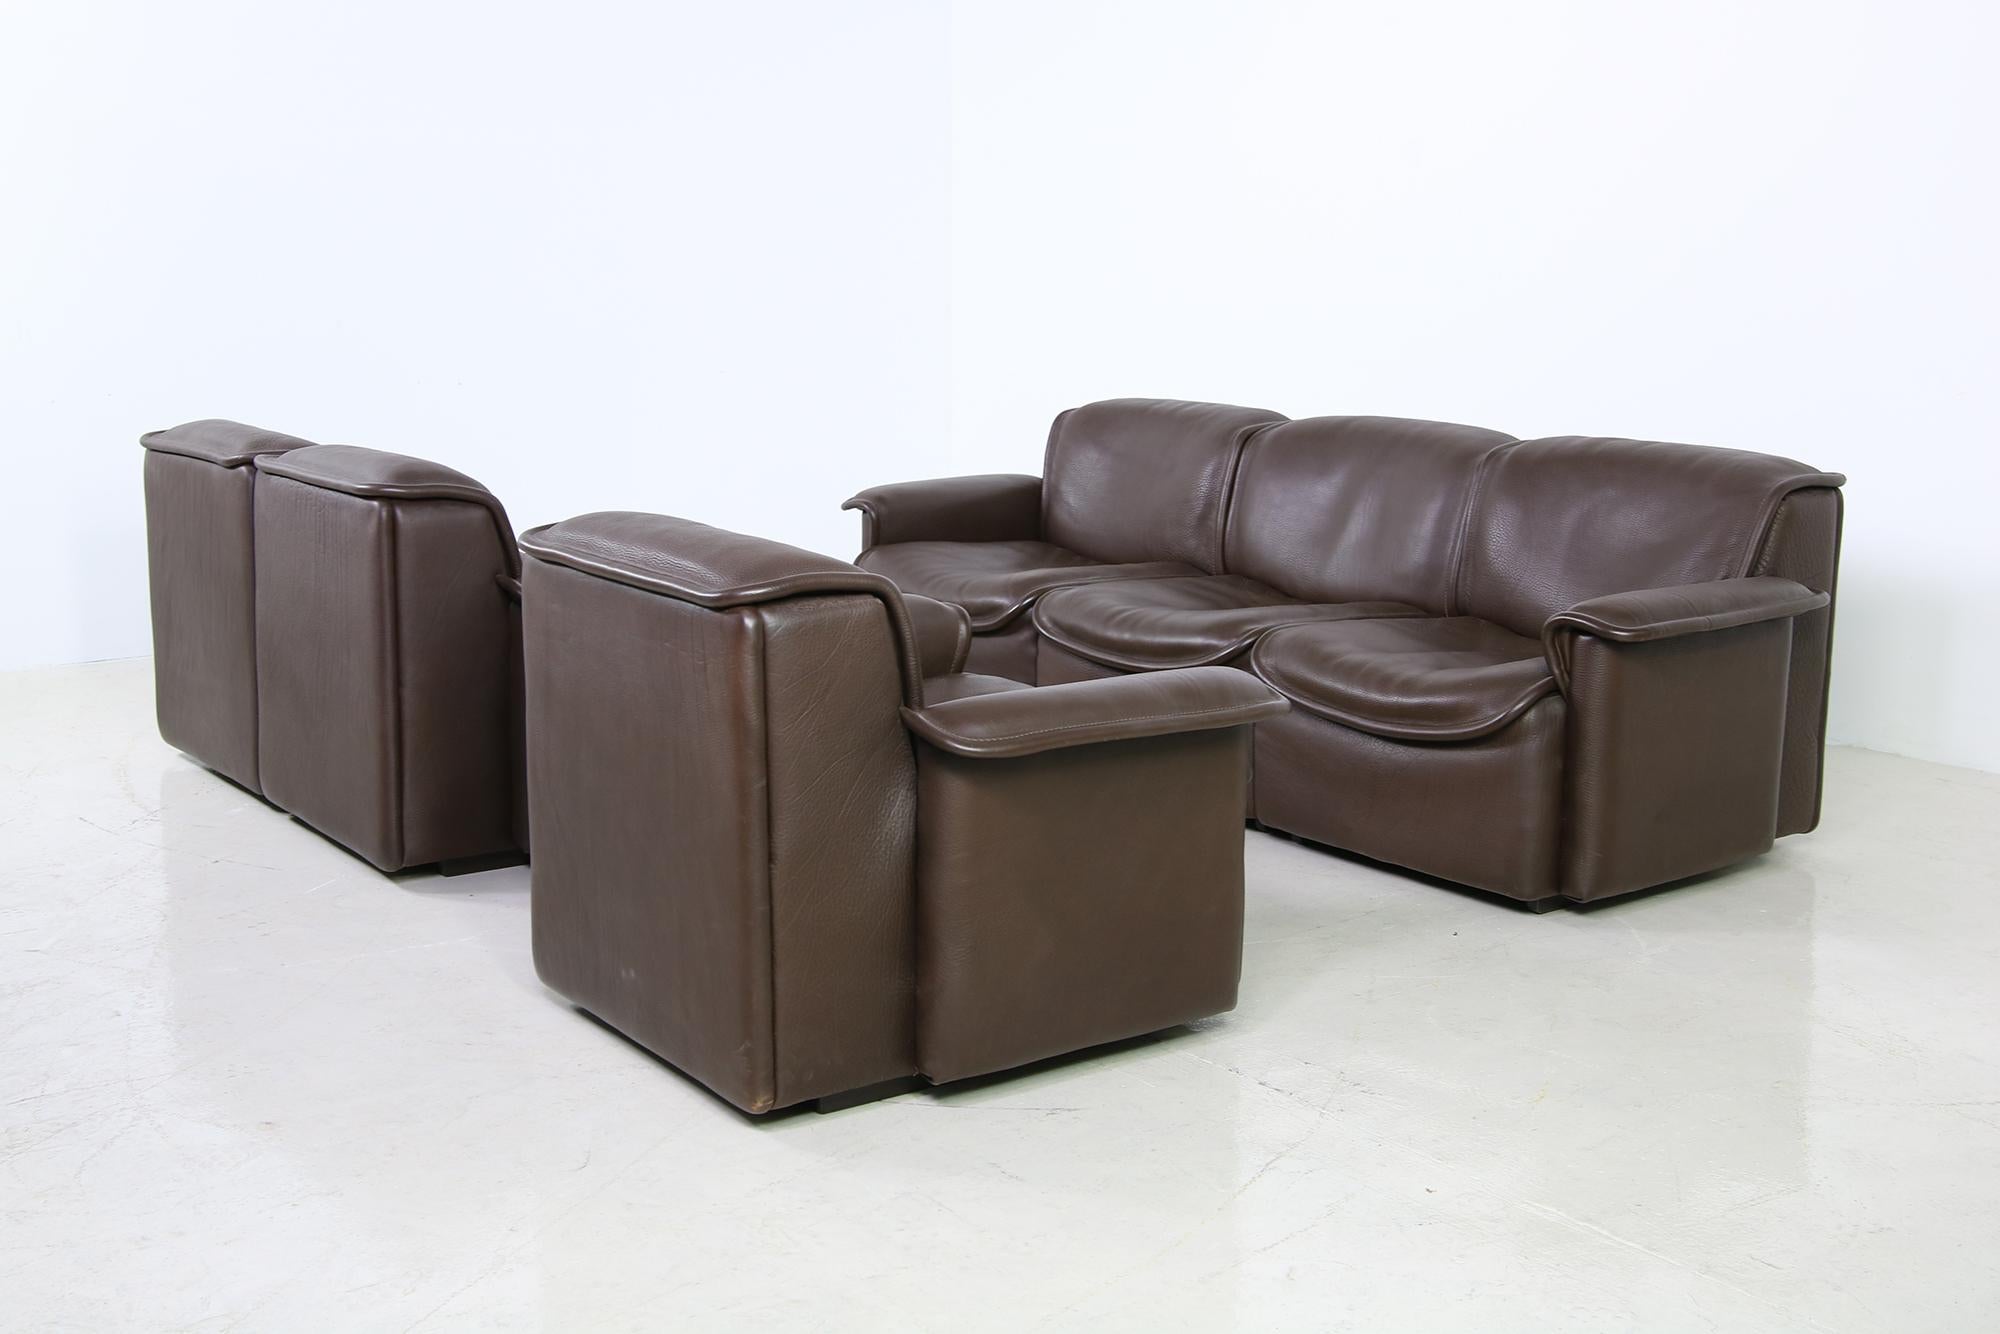 Swiss Vintage 1970s Modular De Sede DS 12 Brown Leather Sofa Set & Chair Seating Group